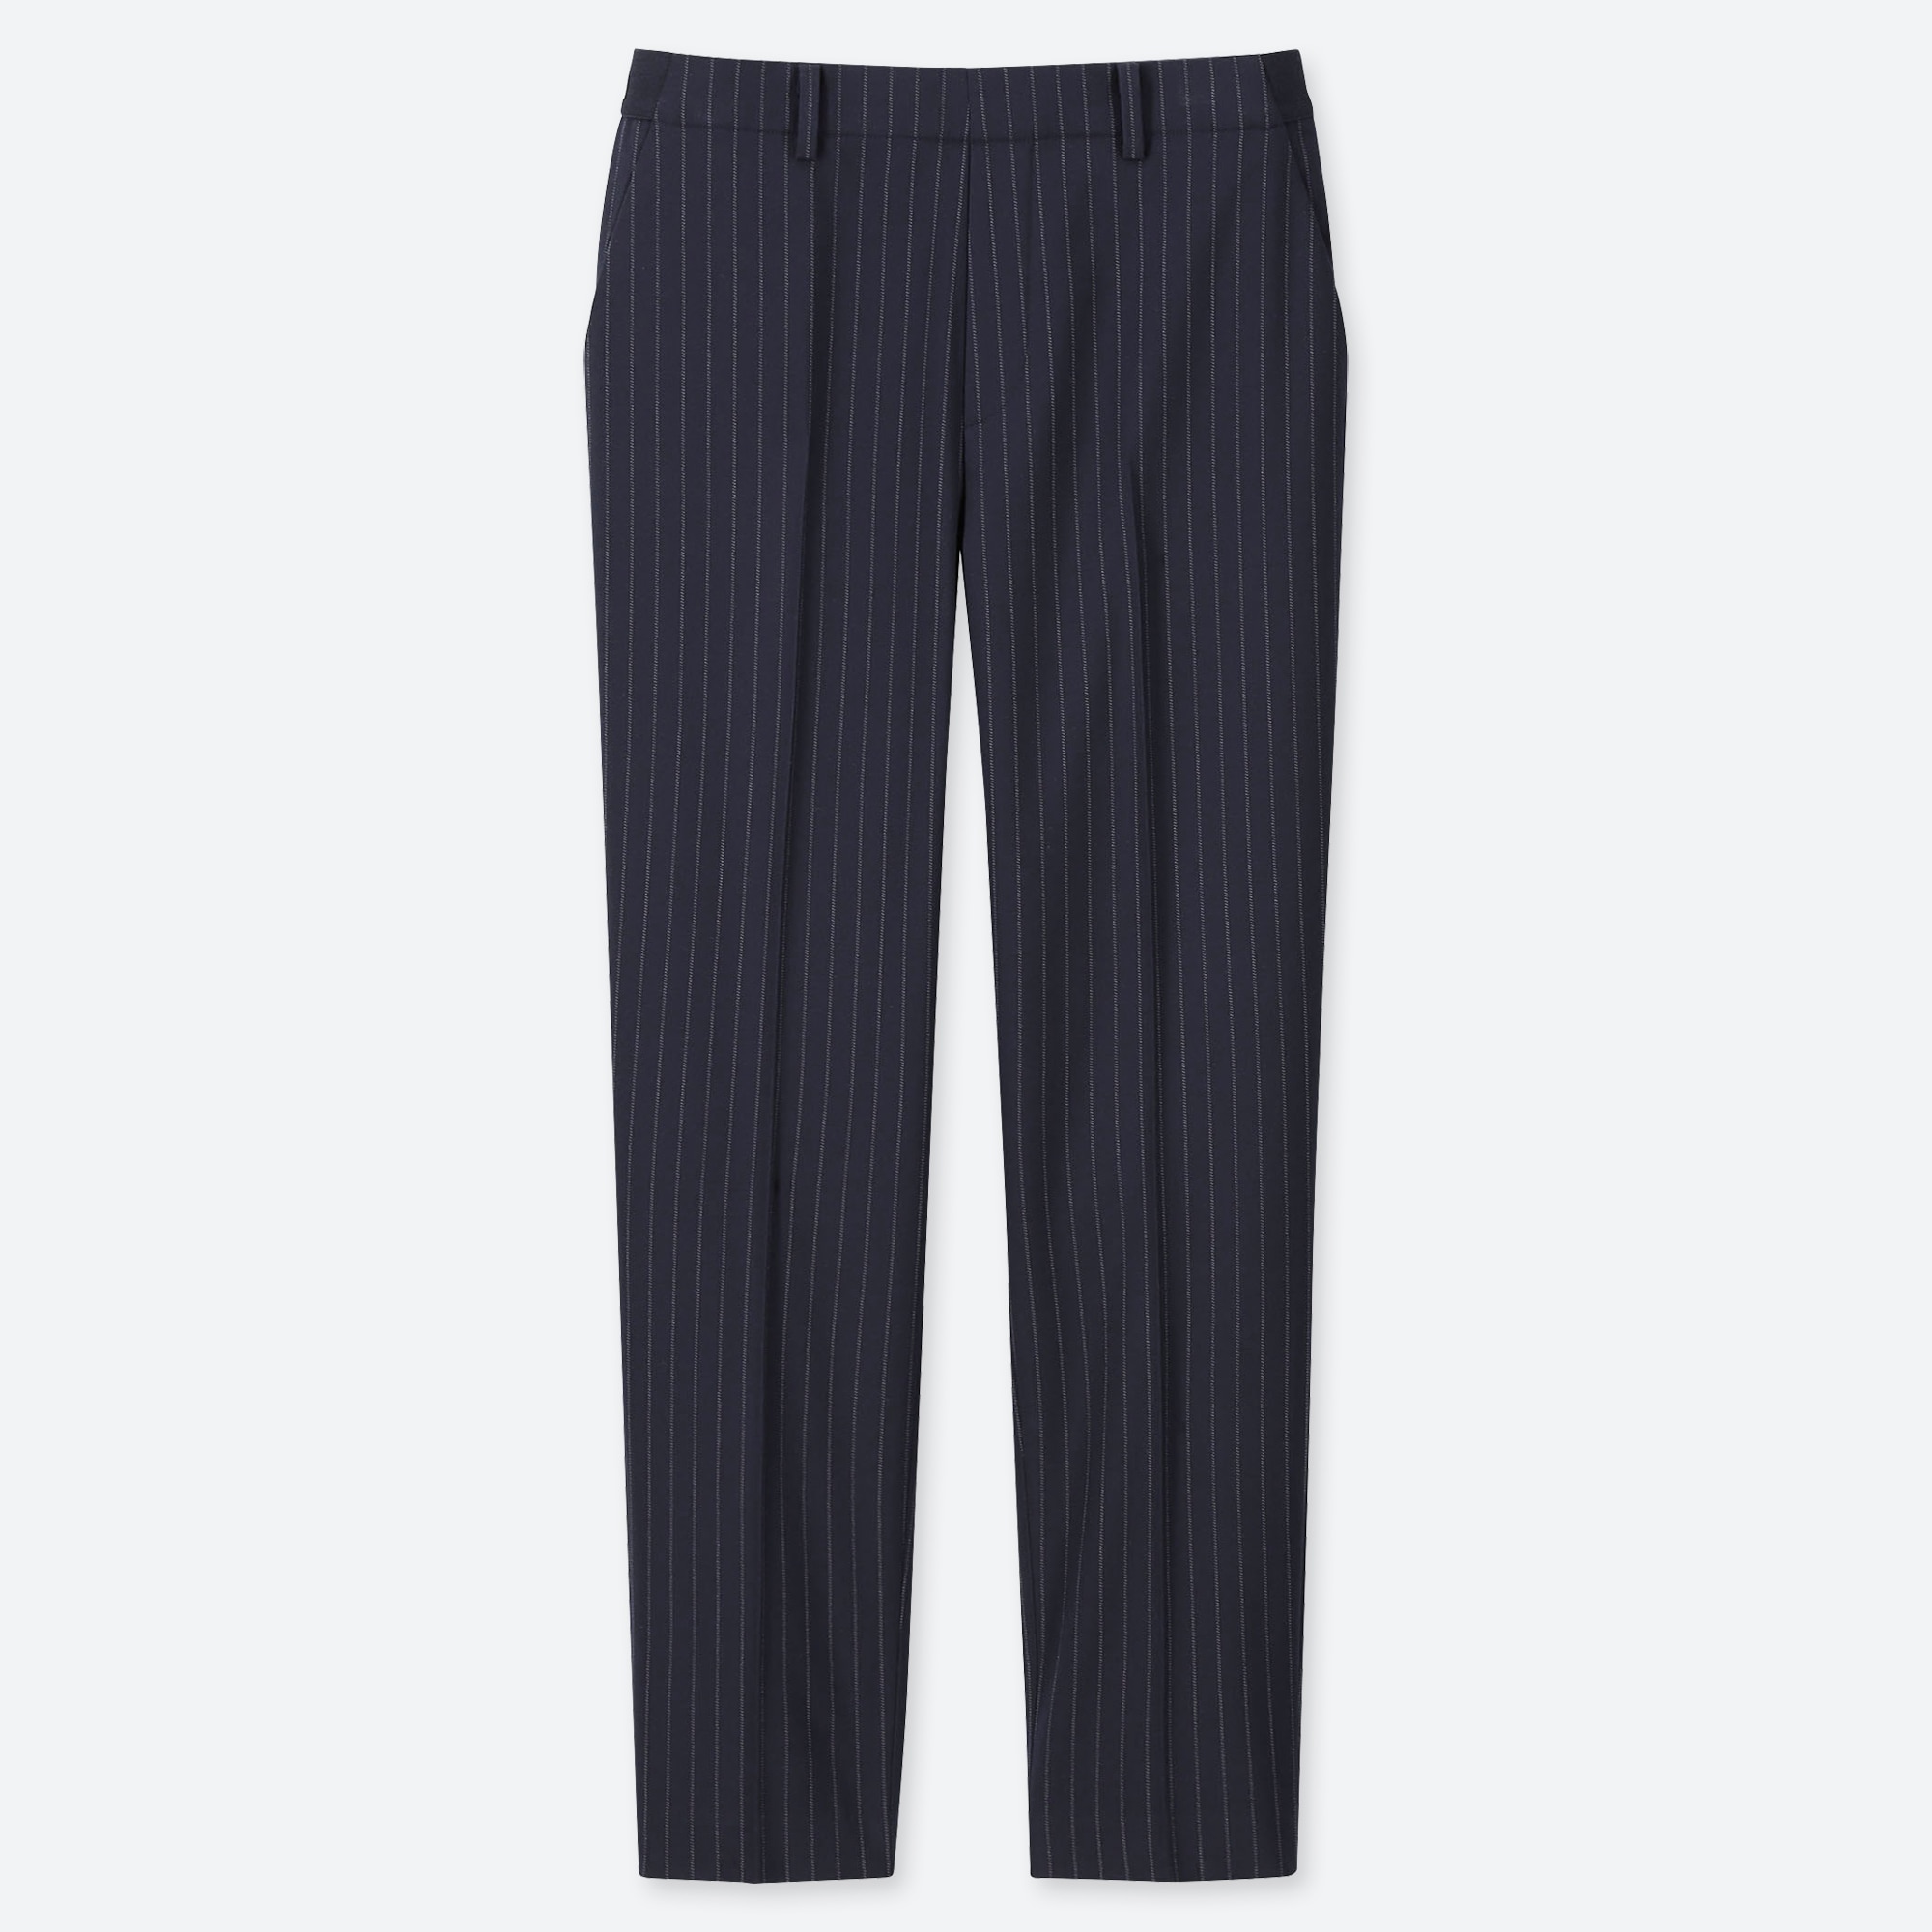 Buy Navy Blue Slim Fit Striped Pants by GentWithcom with Free Shipping